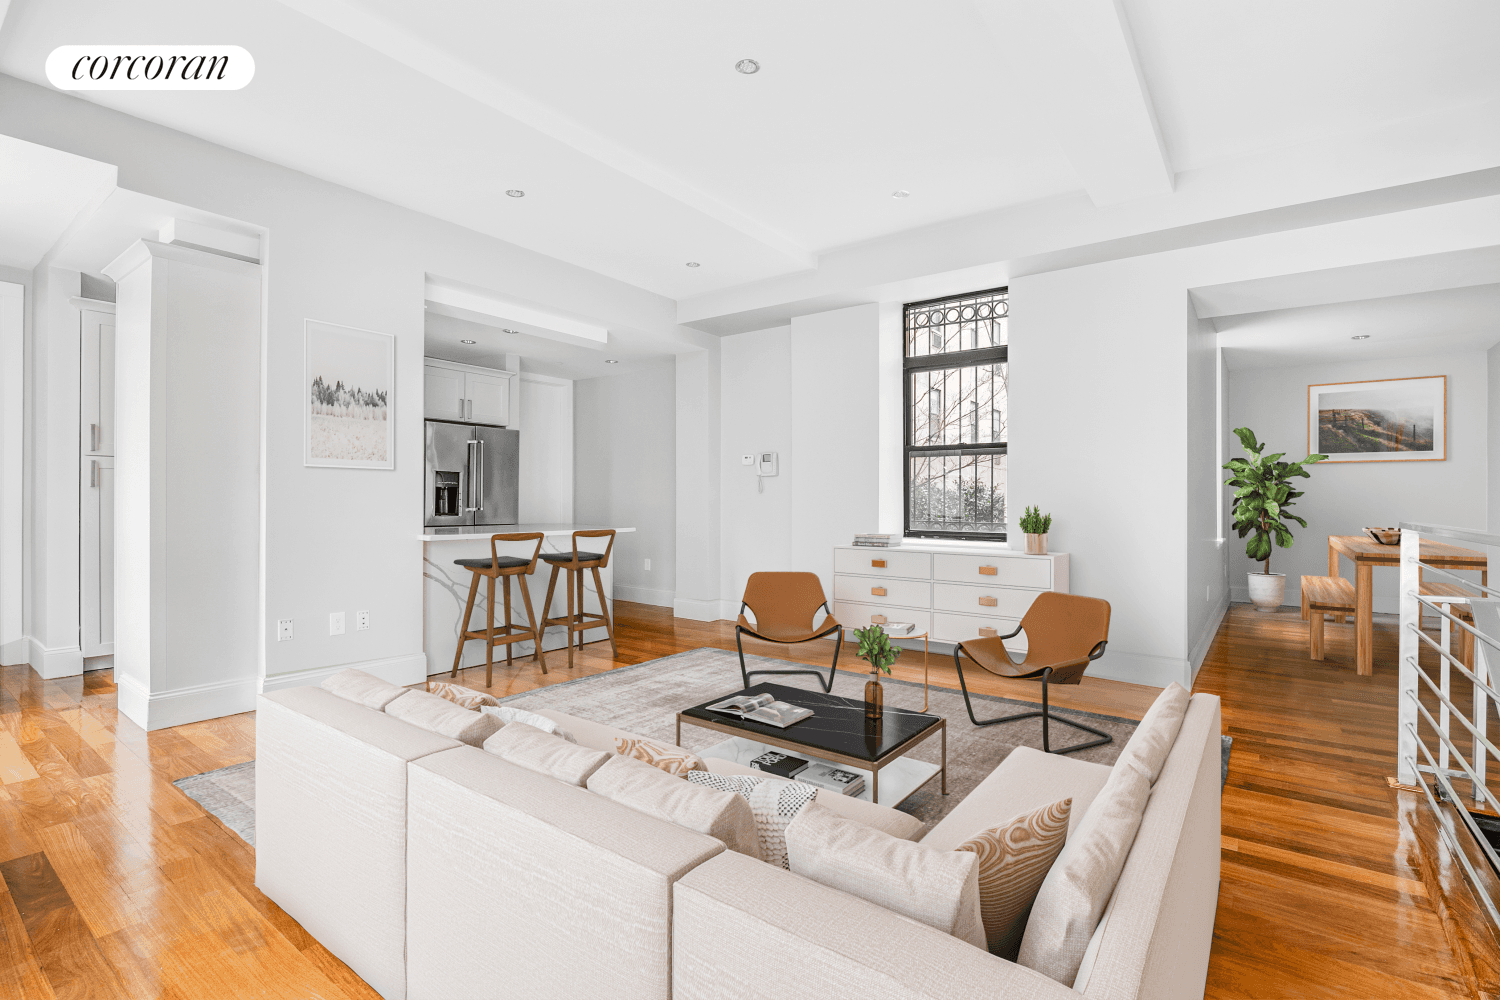 Introducing 10 MT MORRIS PARK WEST, APT 2 on West 121st Street in the heart of one of Harlem's most beautiful historic districts !